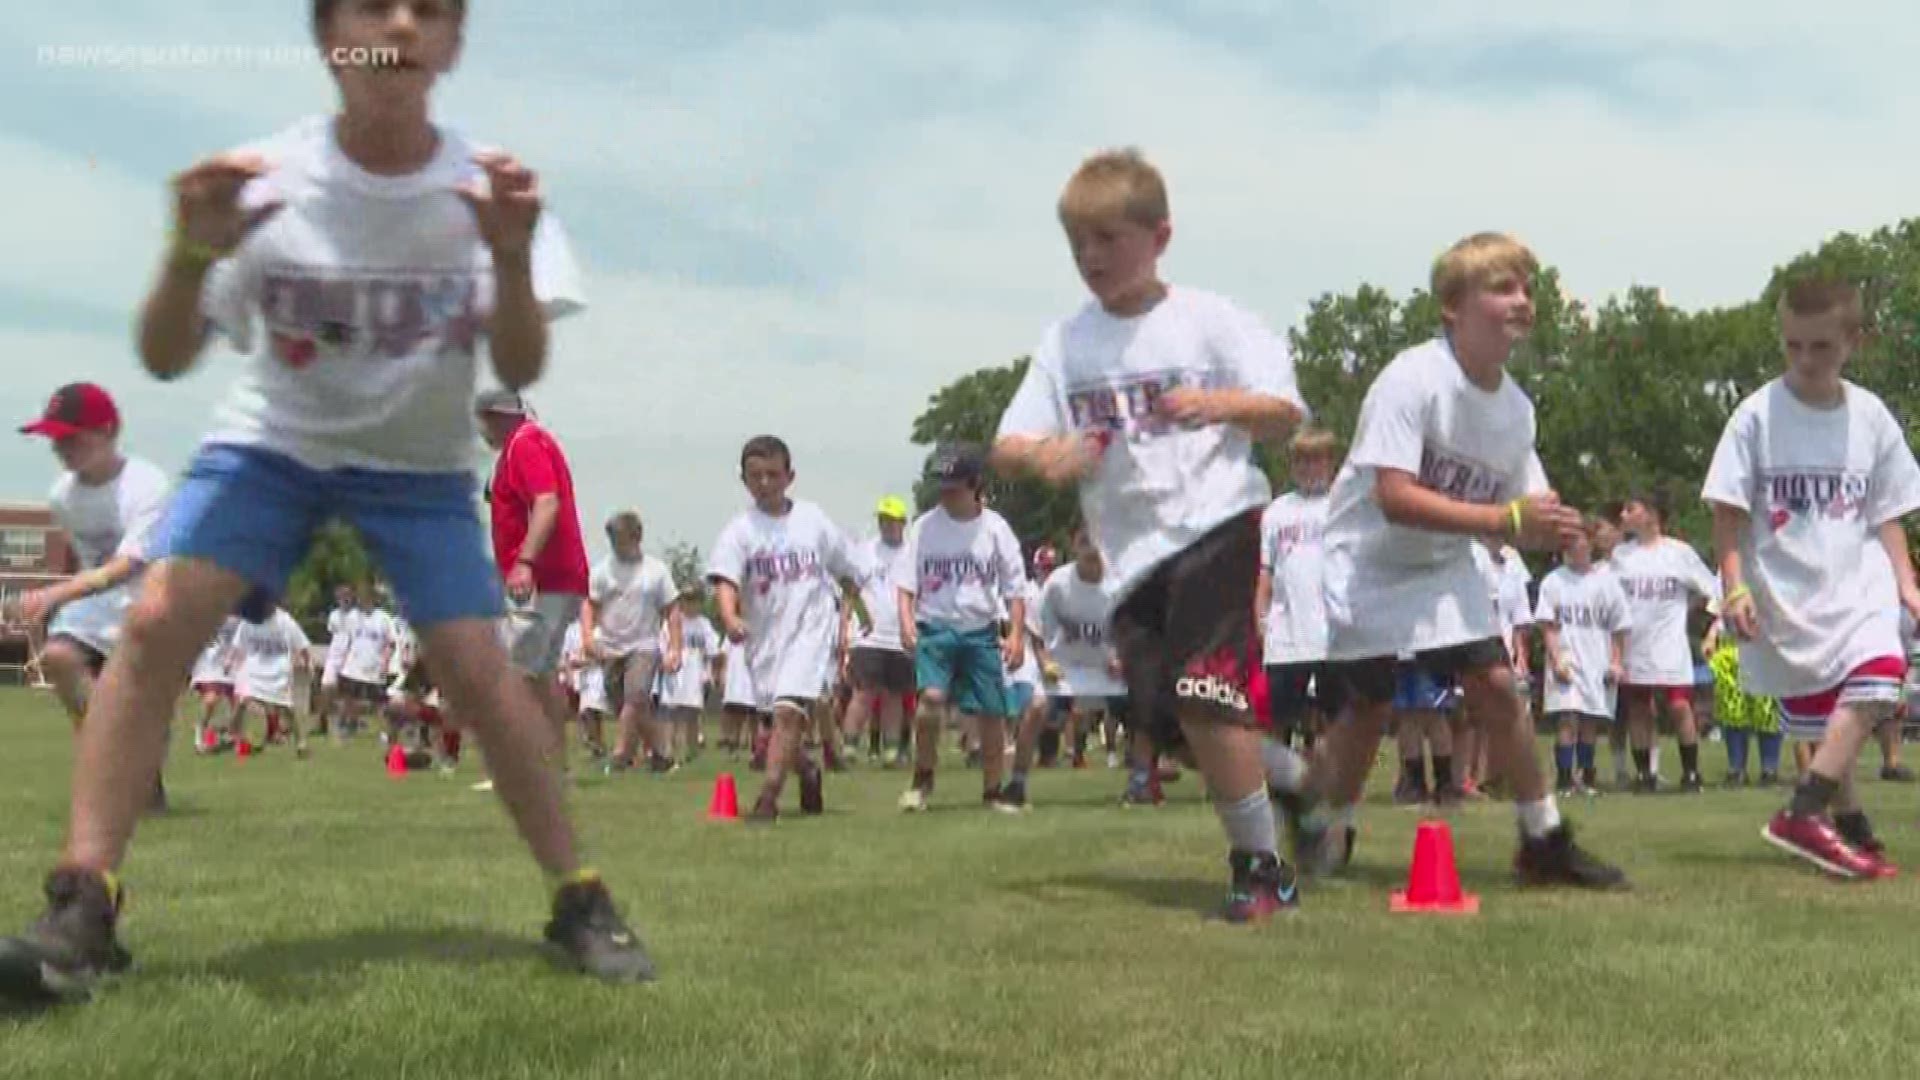 Cheverus High School hosted the fifth annual 'Football for You' clinic Tuesday, July 8.